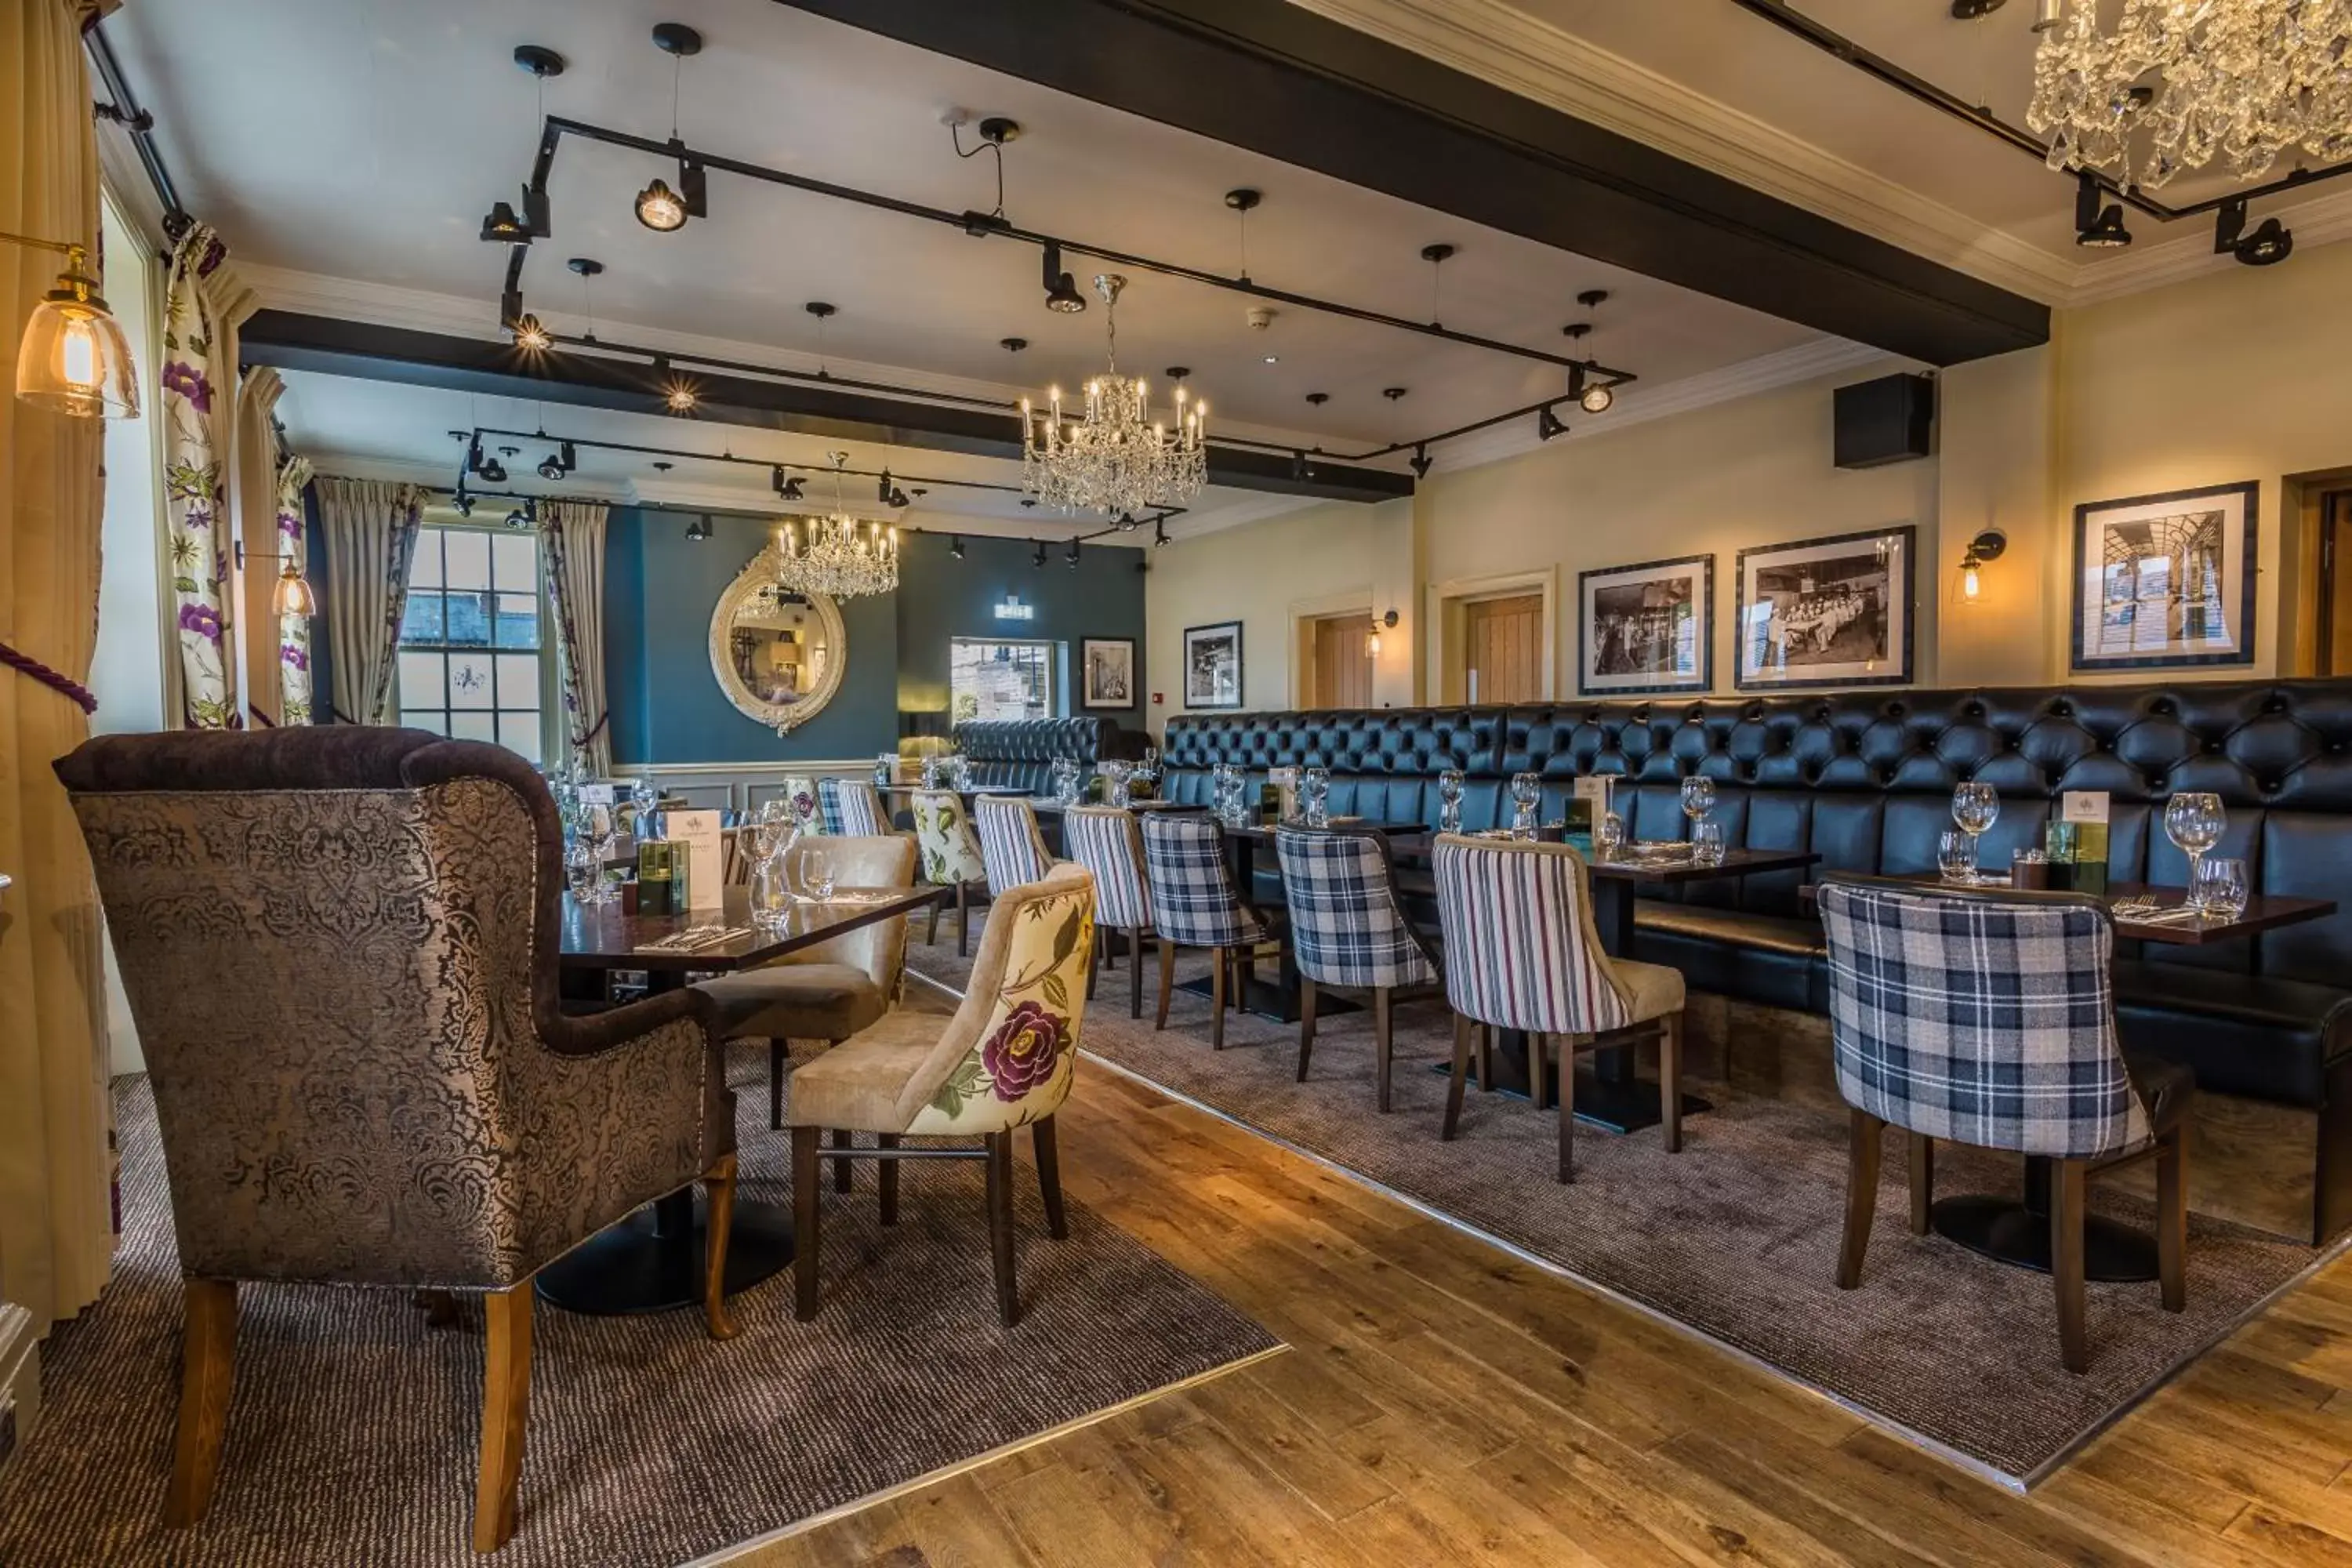 Seating area in The Golden Fleece Hotel, Thirsk, North Yorkshire